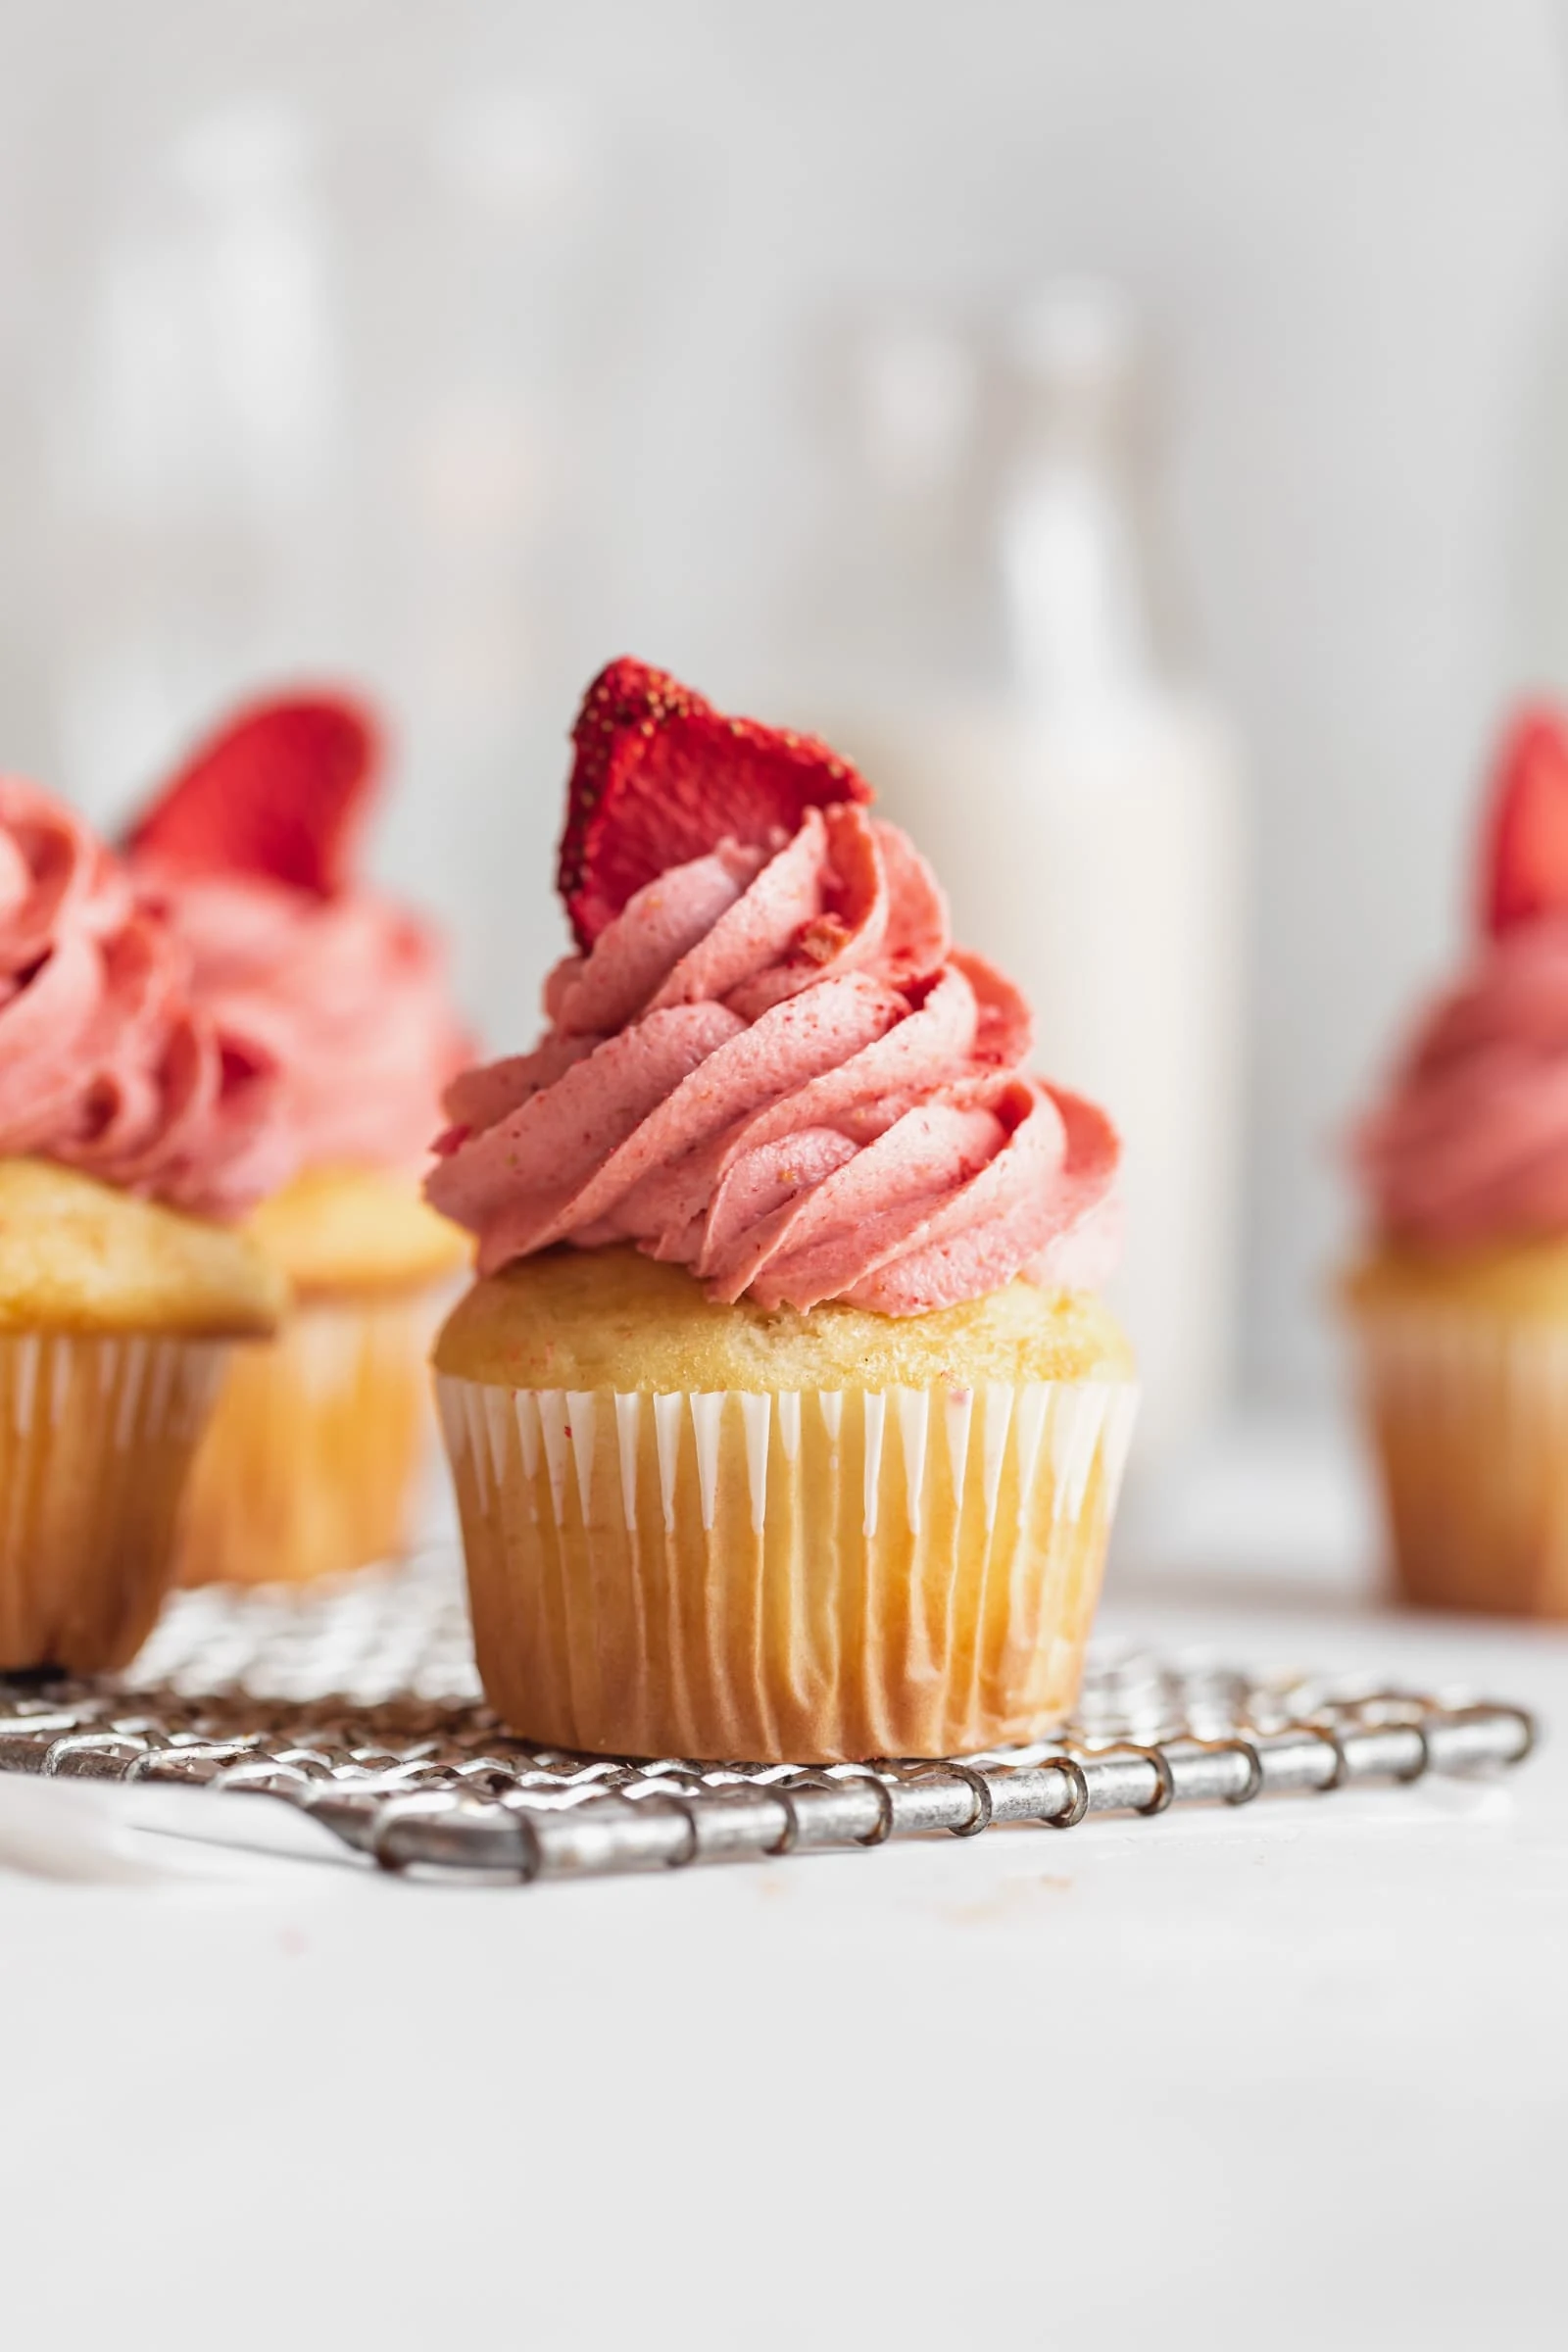 homemade strawberry frosting on a cupcake